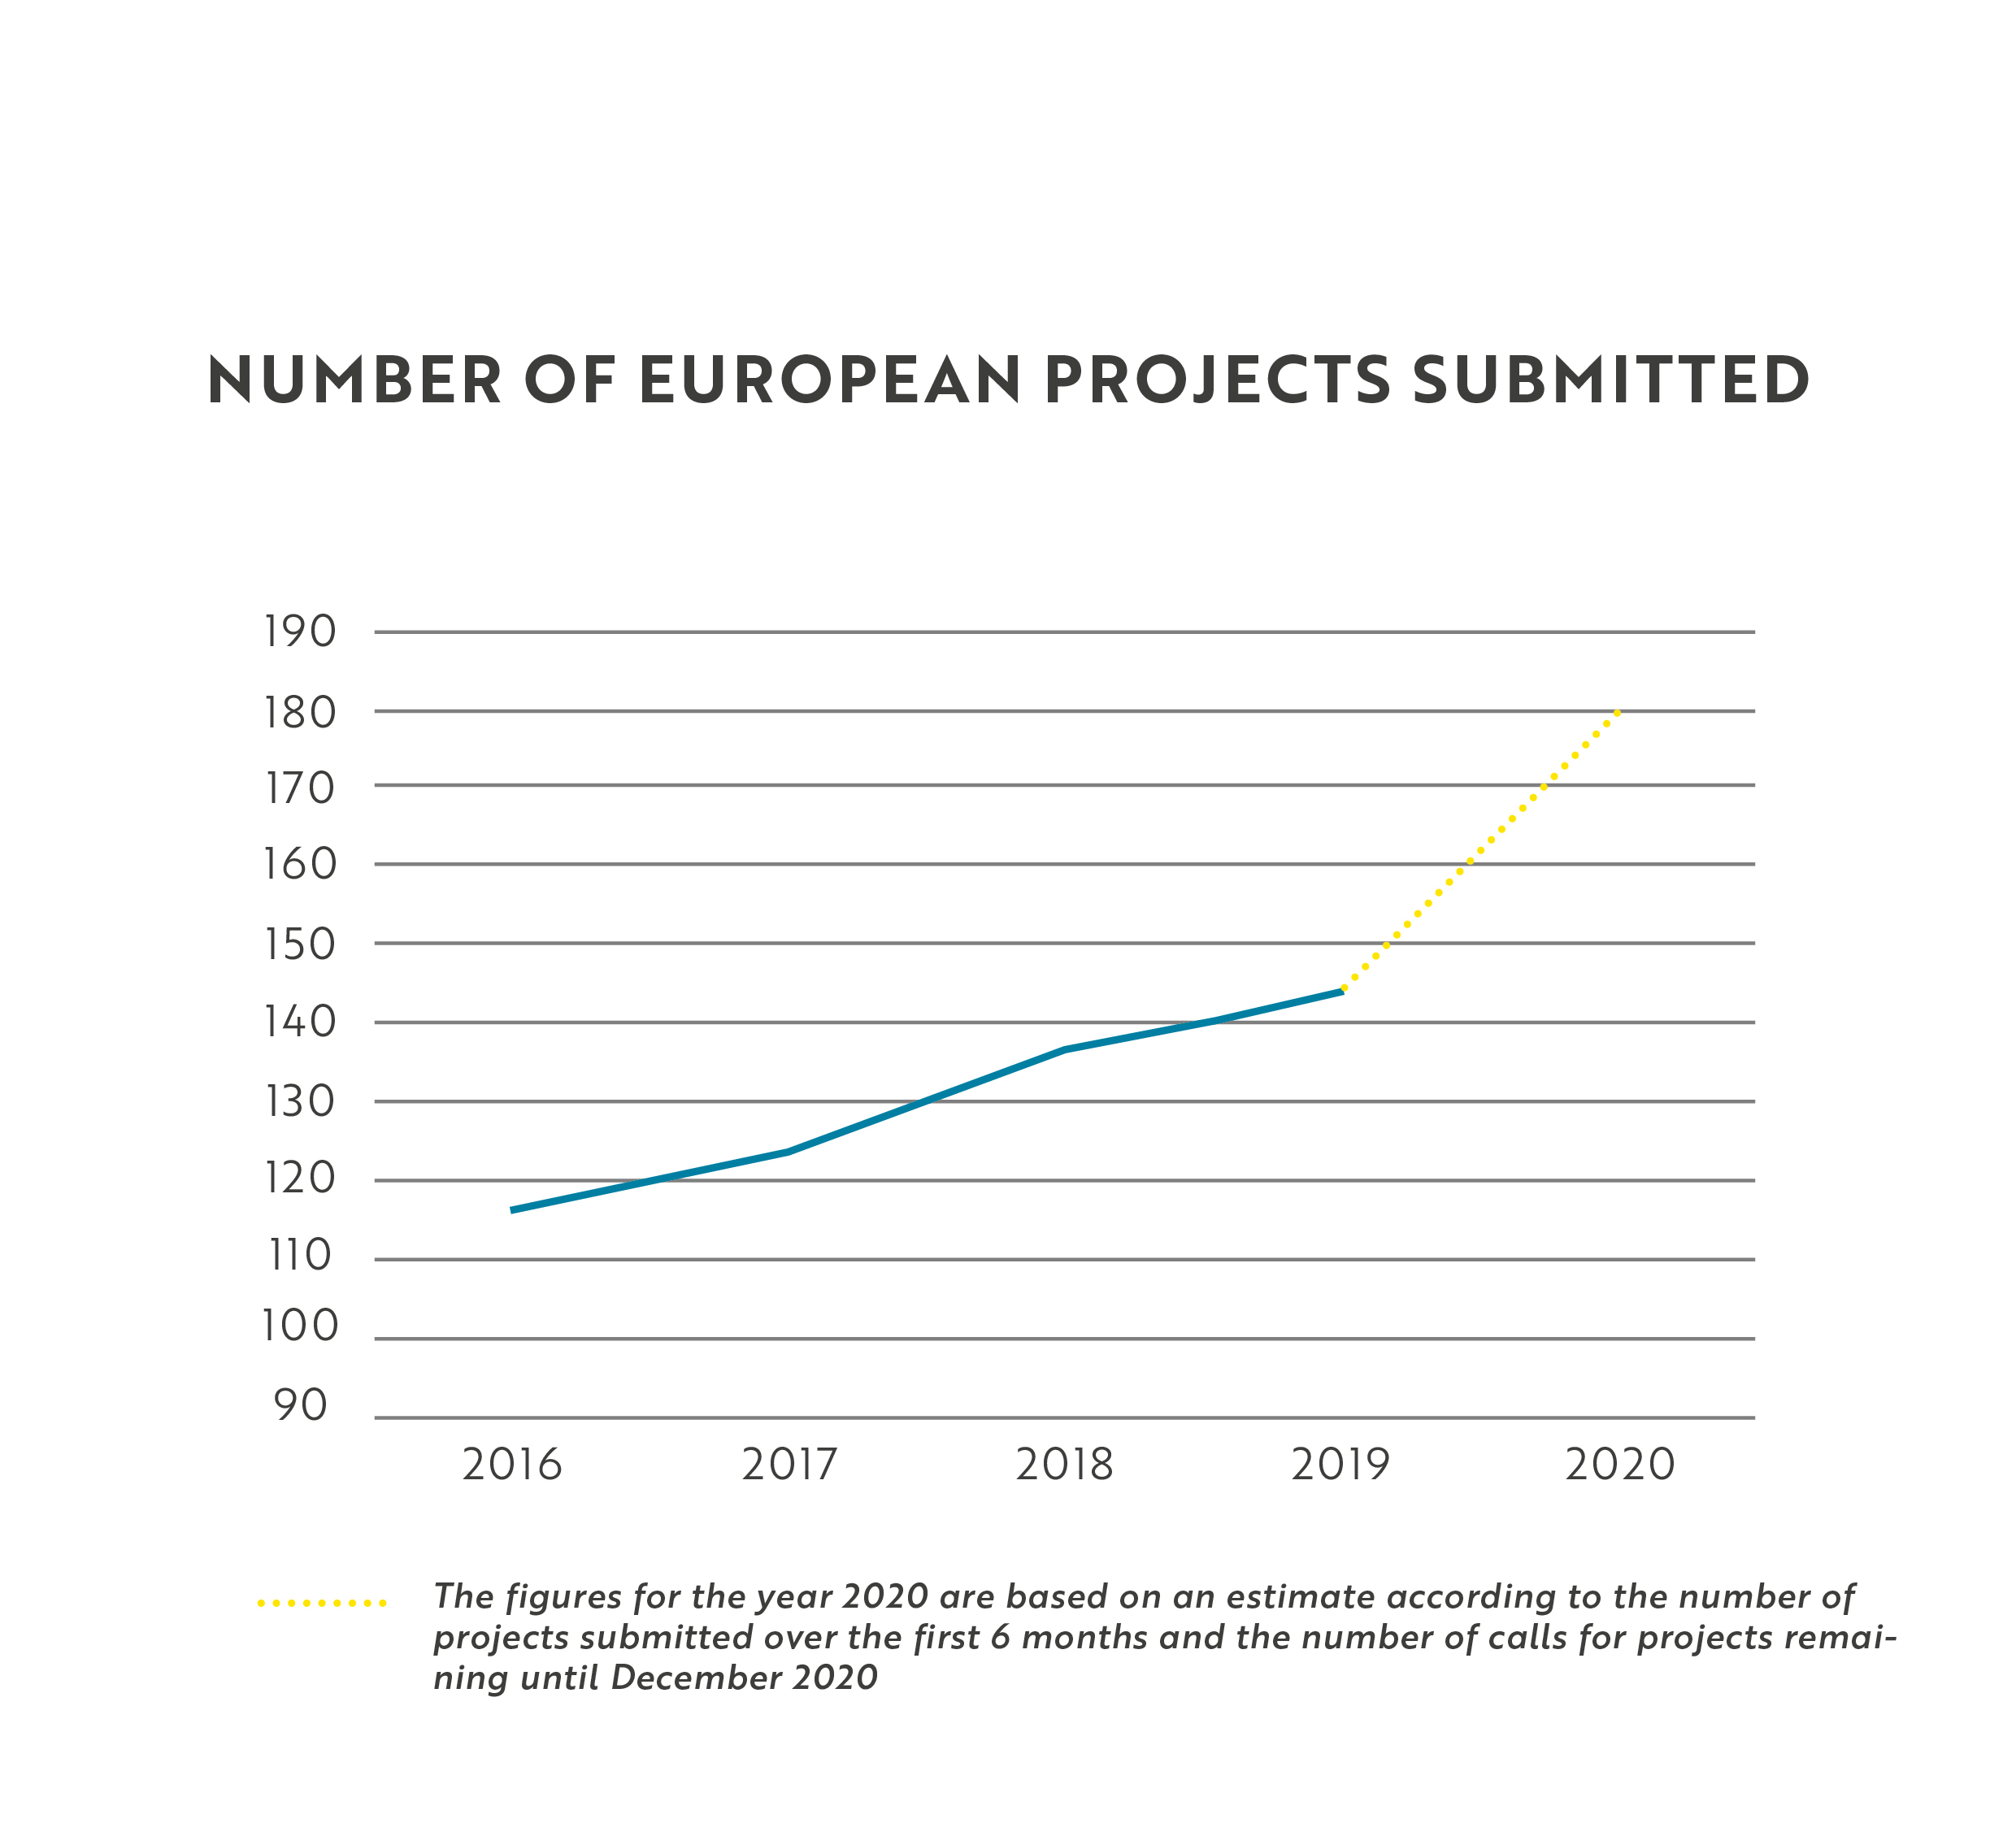 Submitted European projects